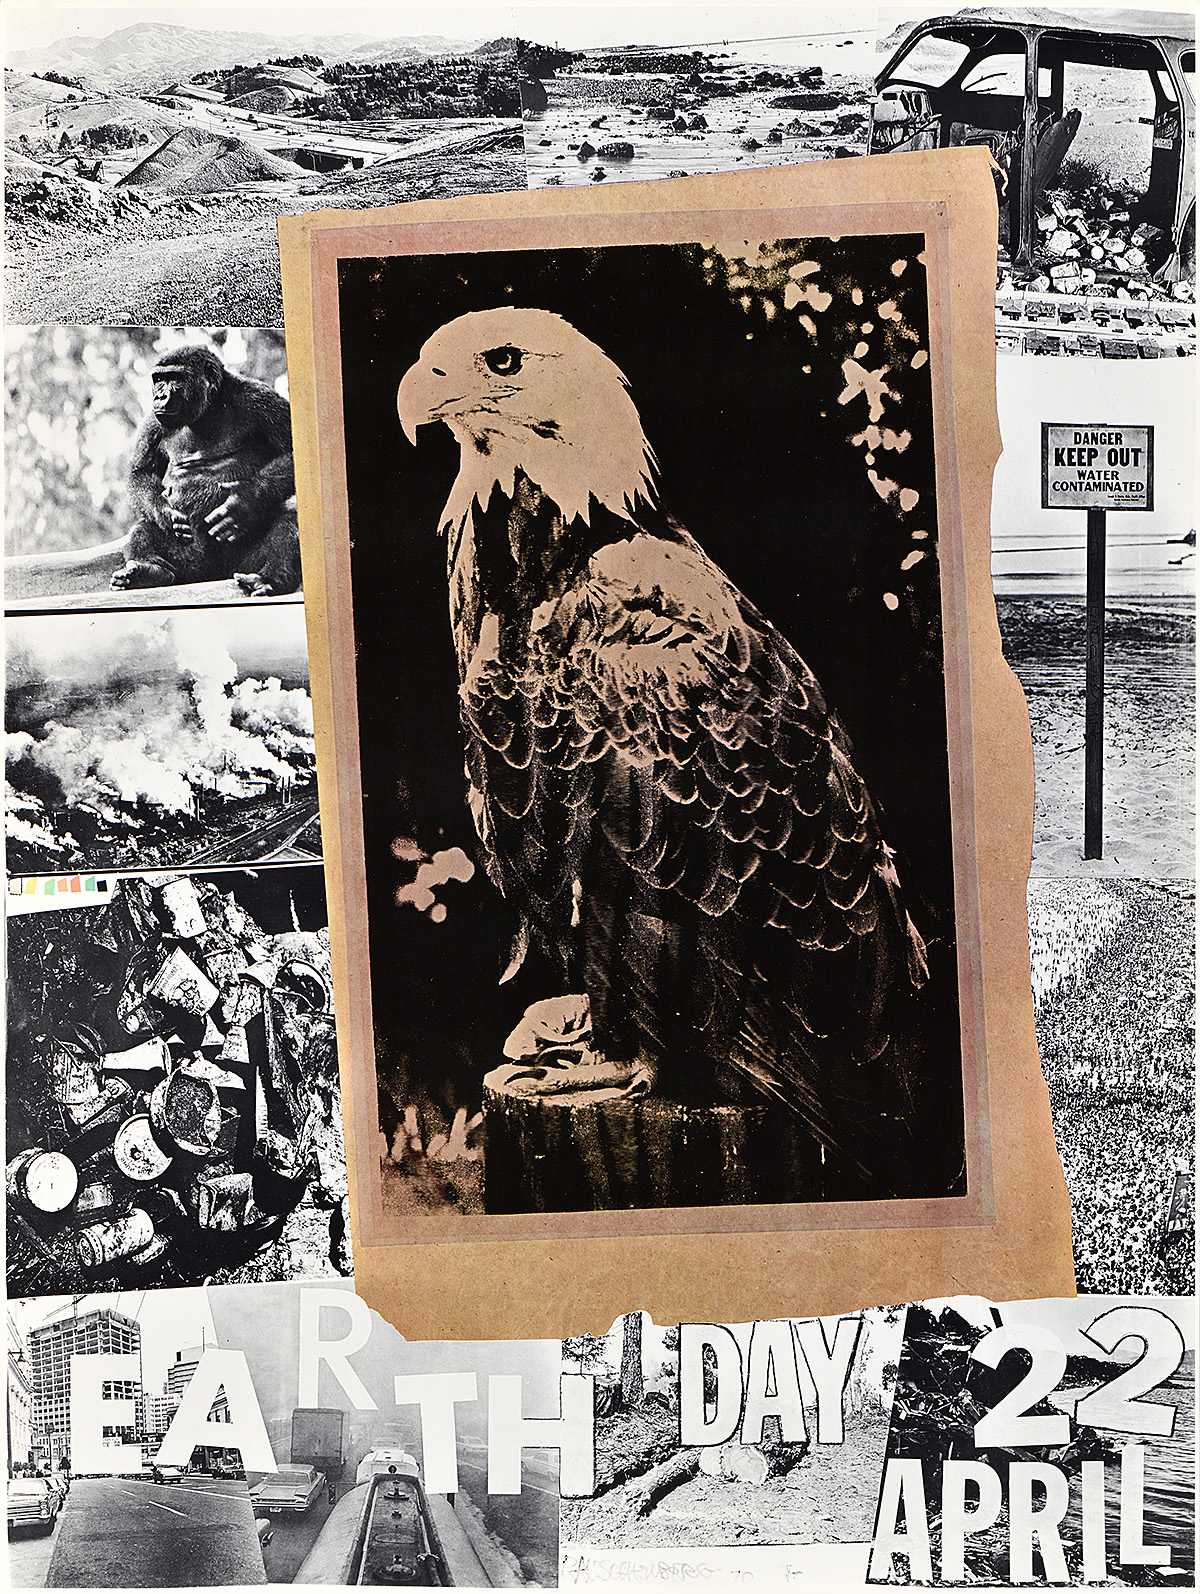 A poster of a photograph of an eagle surrounded by various photographs of decrepit landscapes.